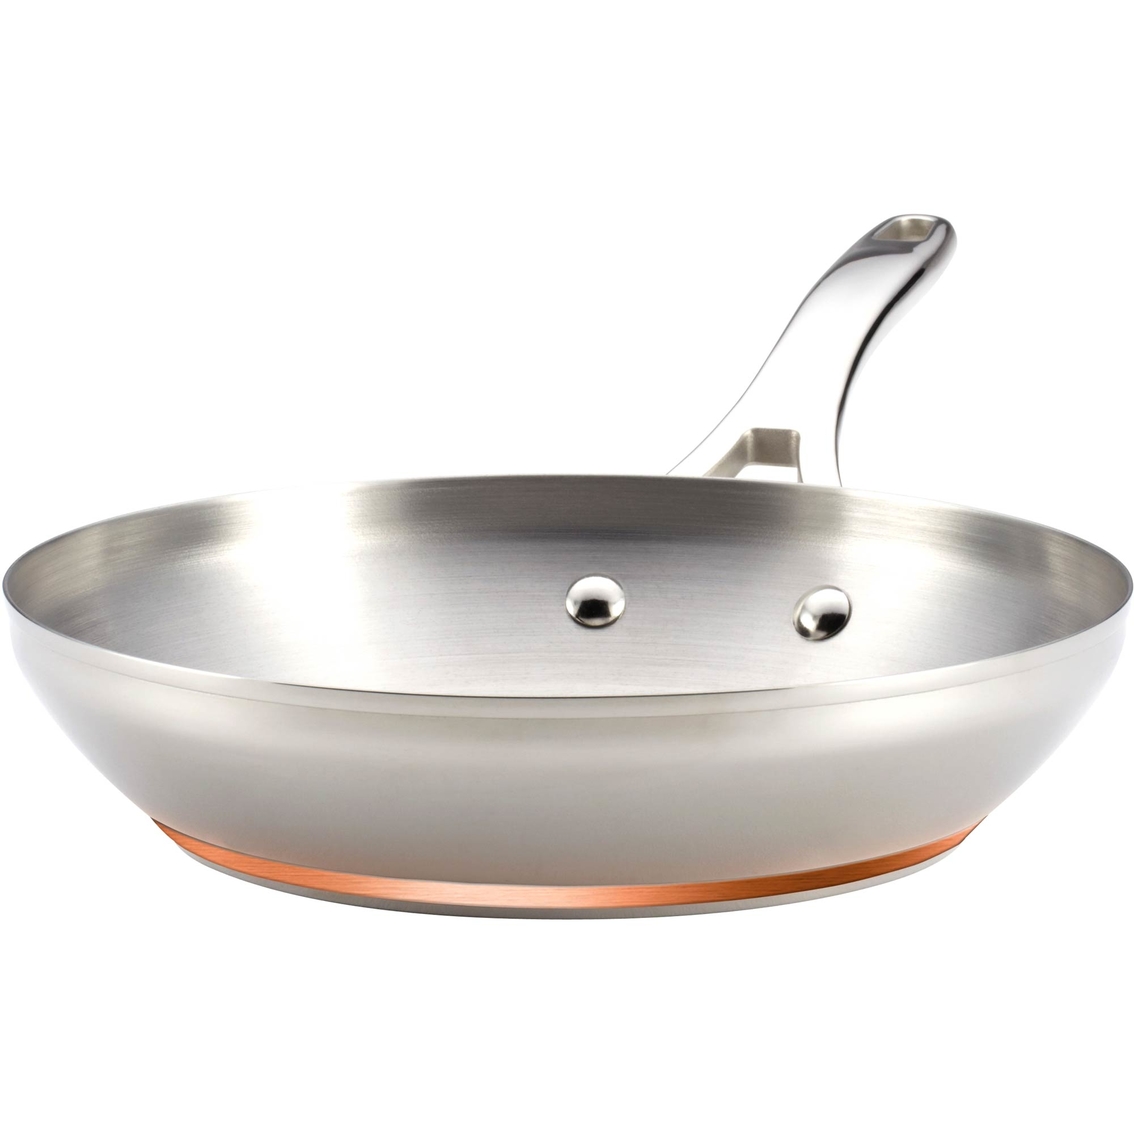 Anolon Nouvelle Copper Stainless Steel 12 in. Covered French Skillet - Image 2 of 4